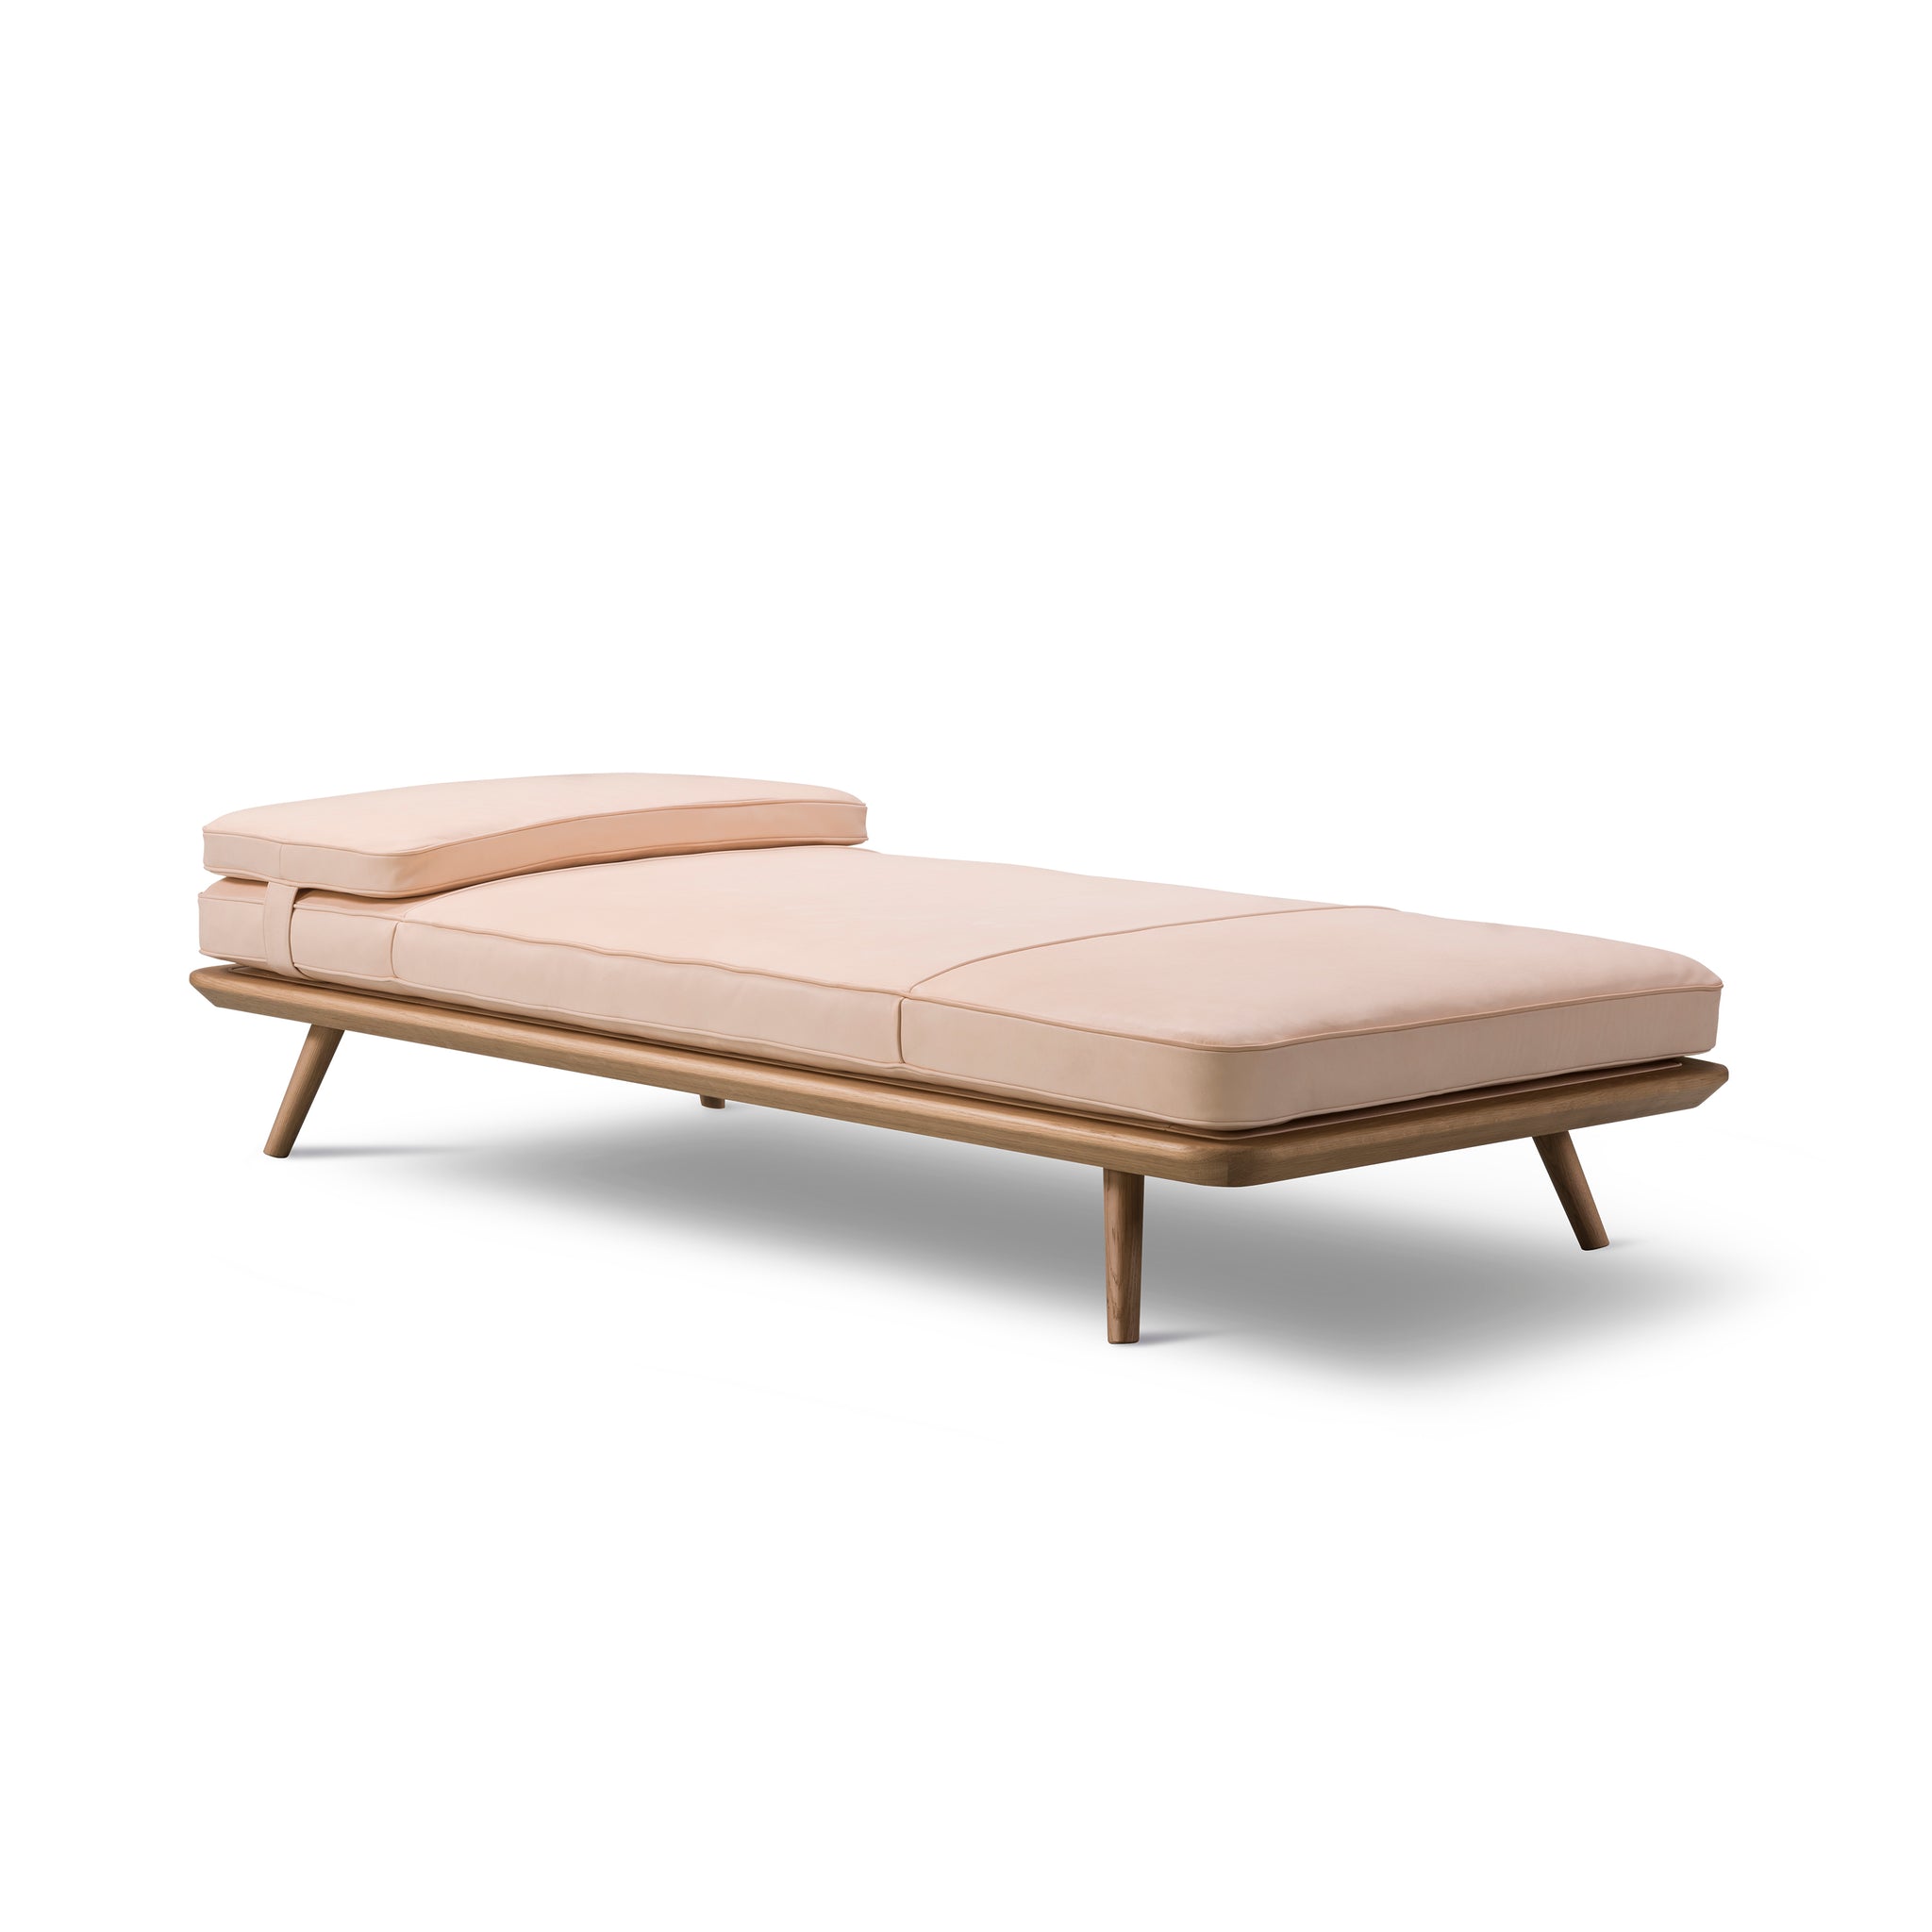 Spine Daybed